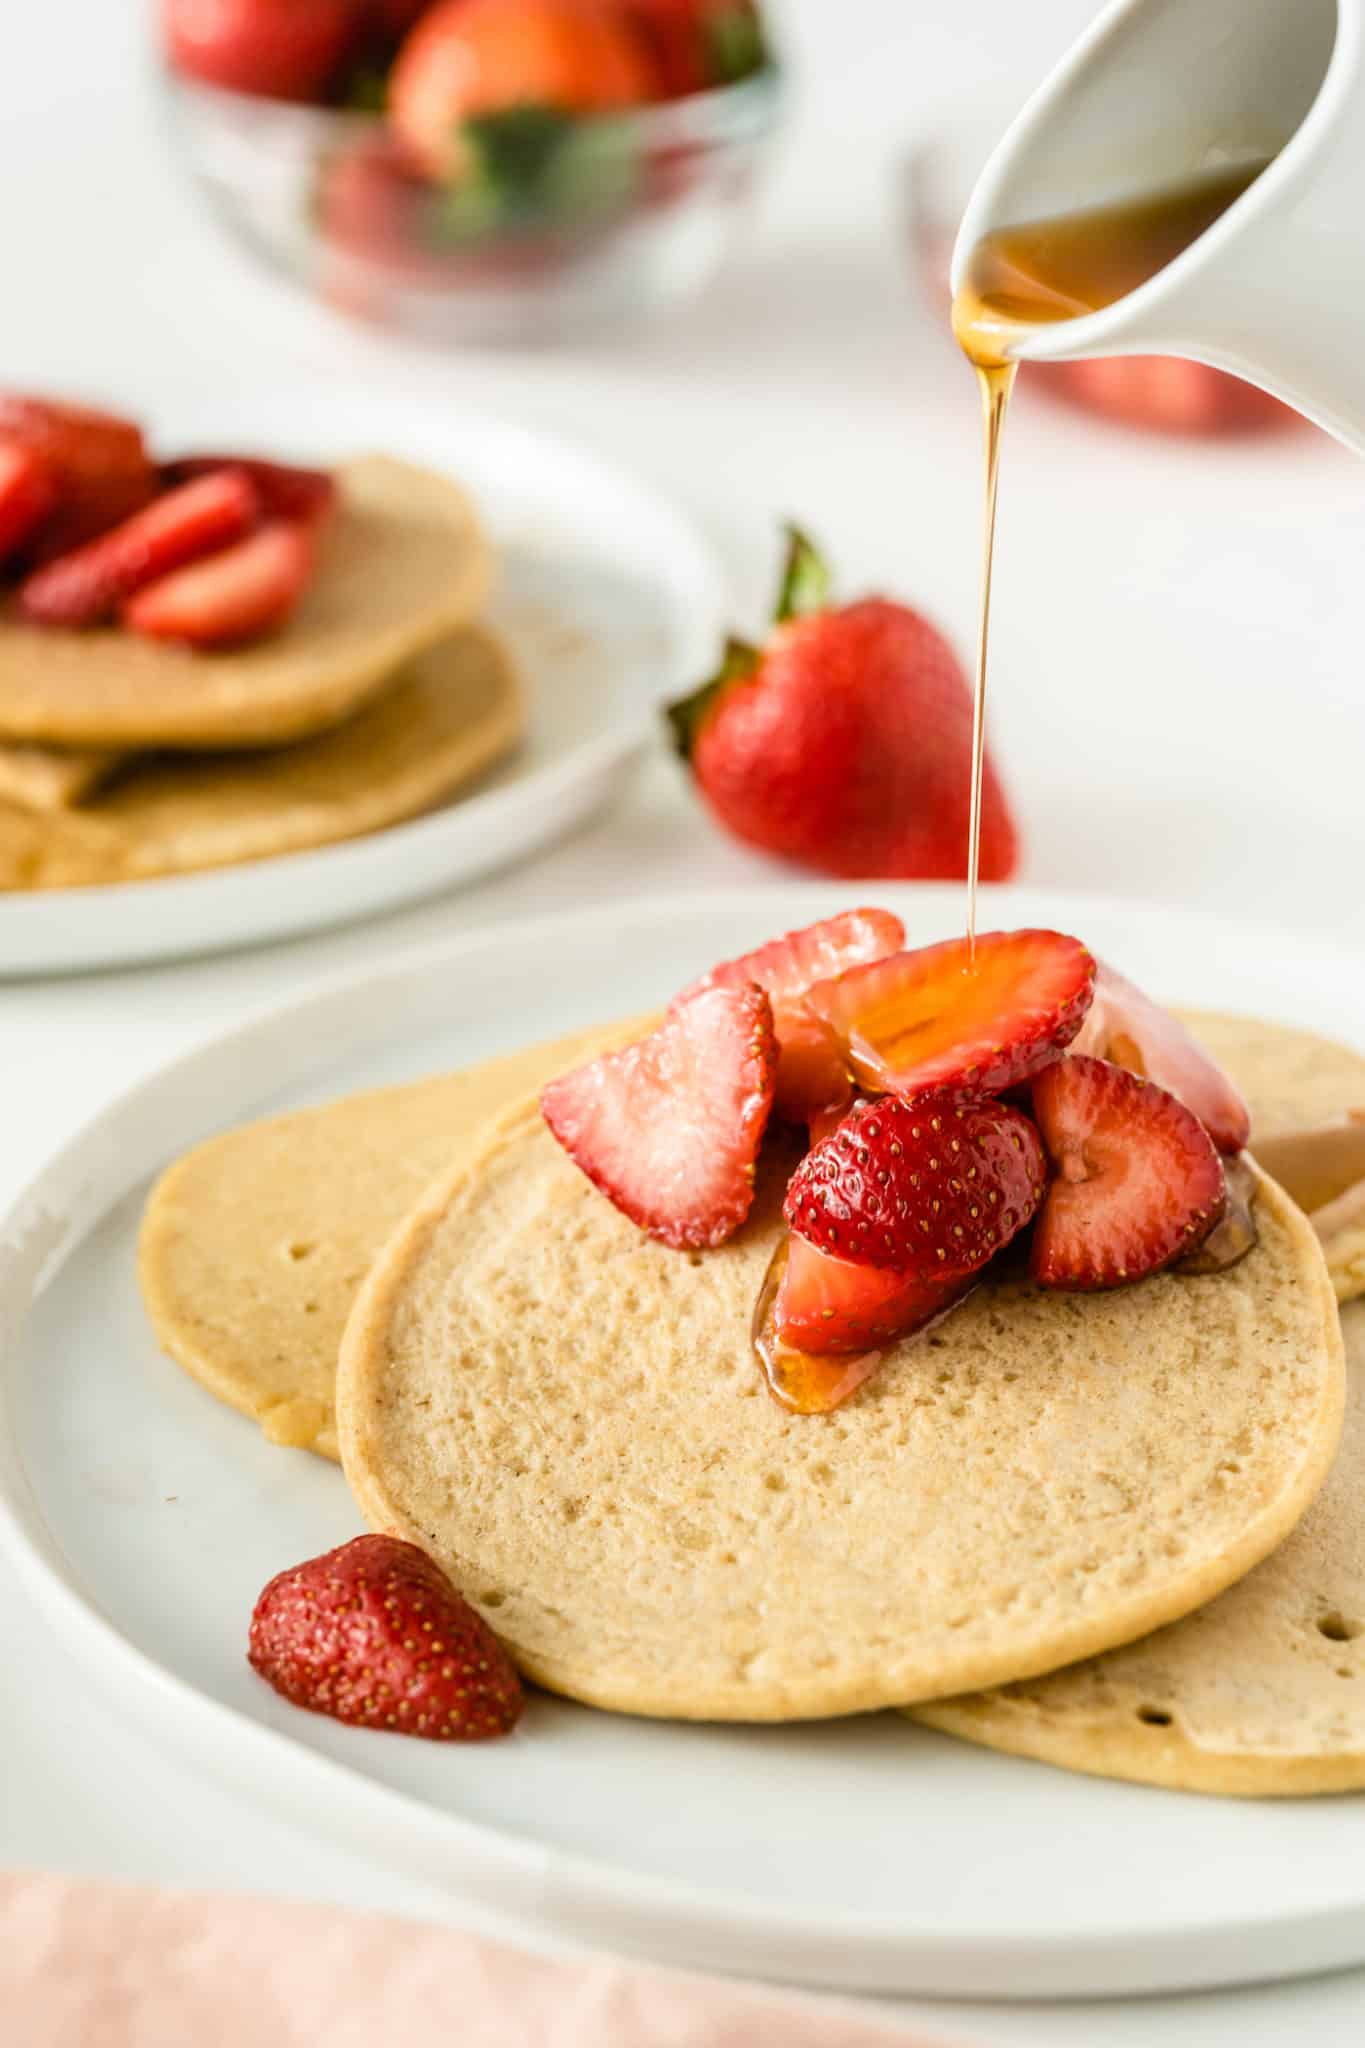 Oat milk pancakes with syrup and strawberries.